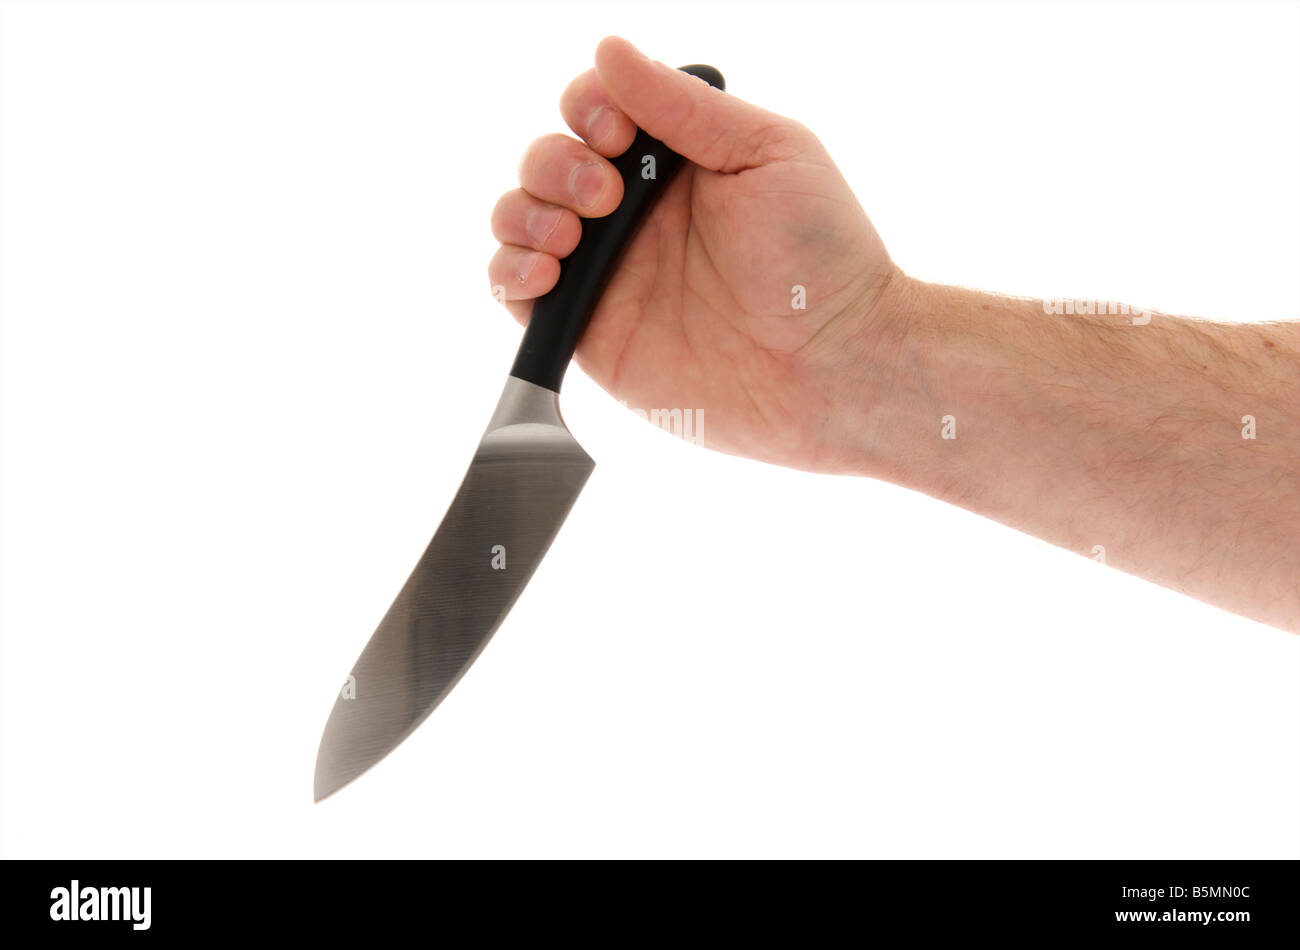 mans male right outstretched hand holding a knife like a dagger against a white background Stock Photo